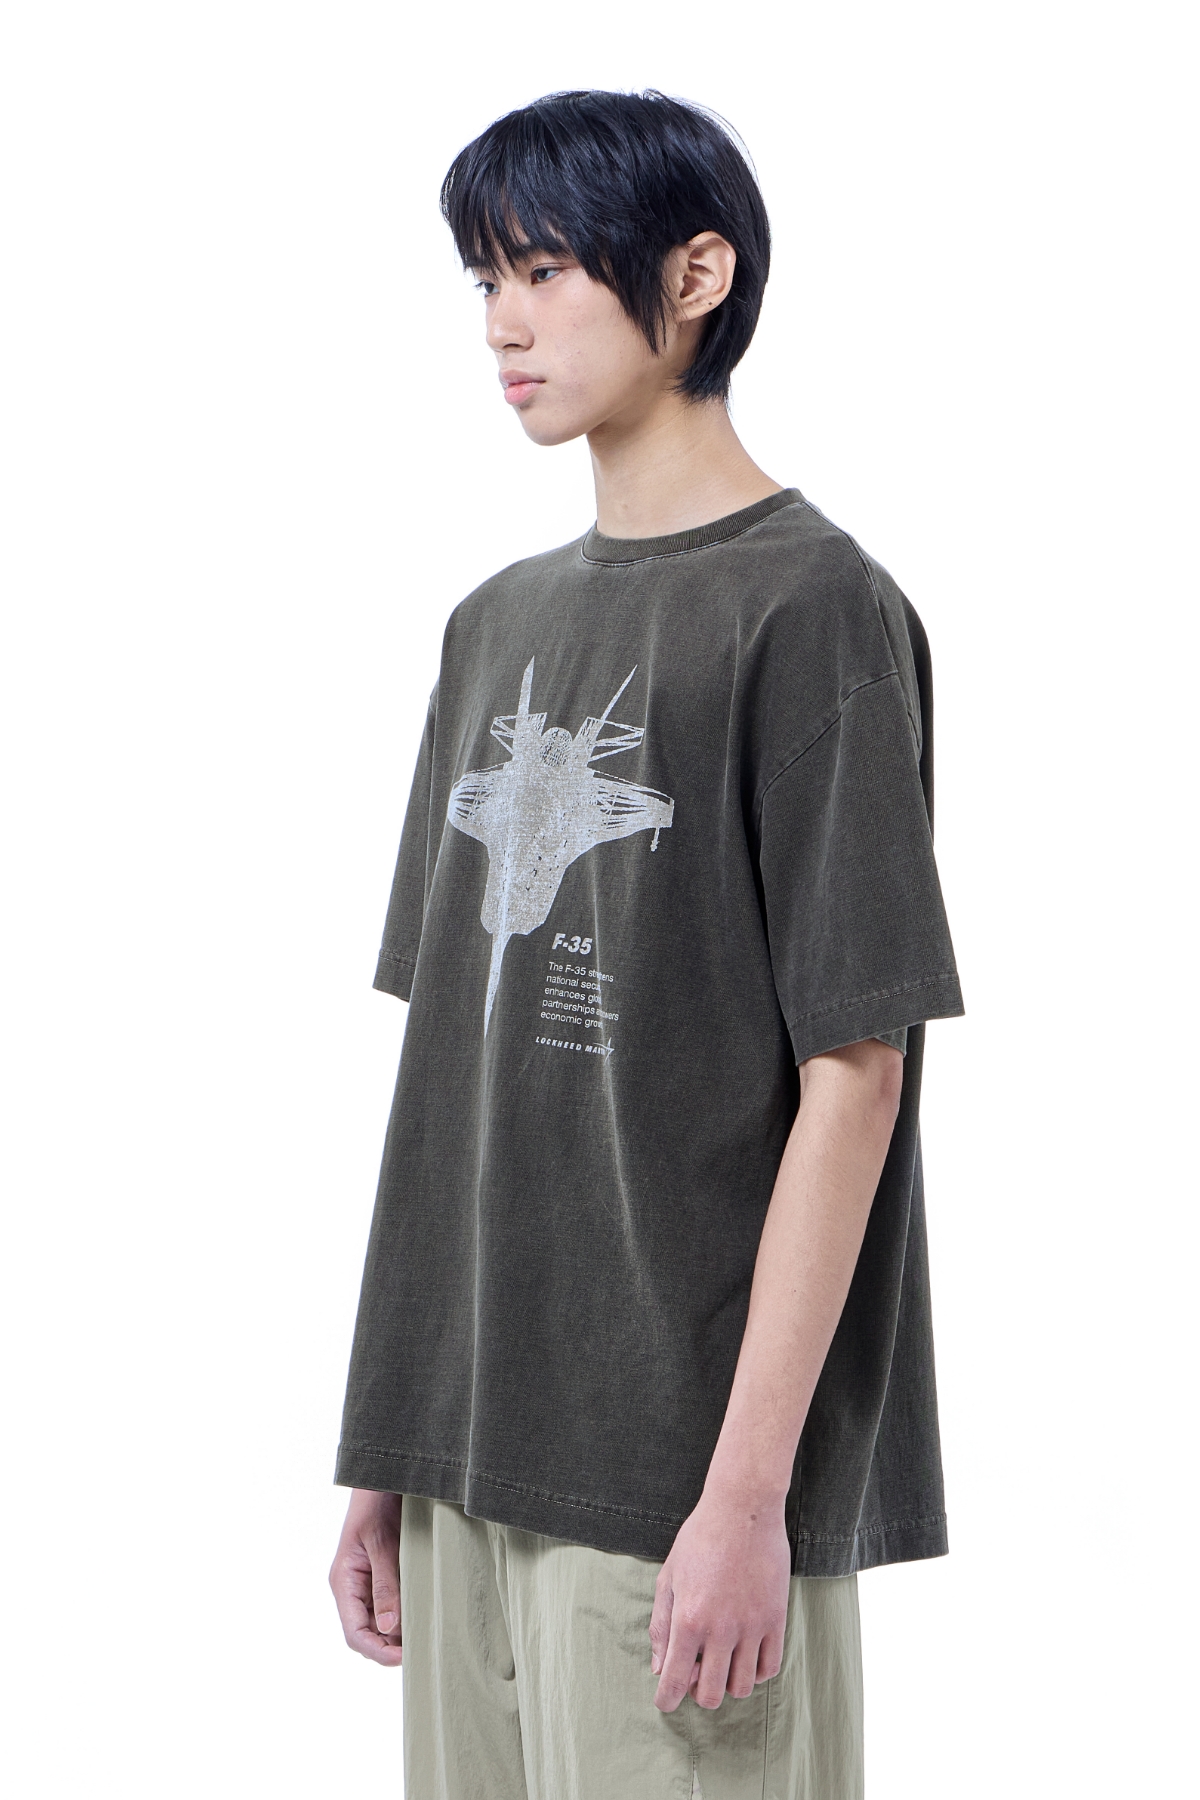 LM F-35 GRAPHIC GARMENT DYED OVER T-SHIRT (CHARCOAL)